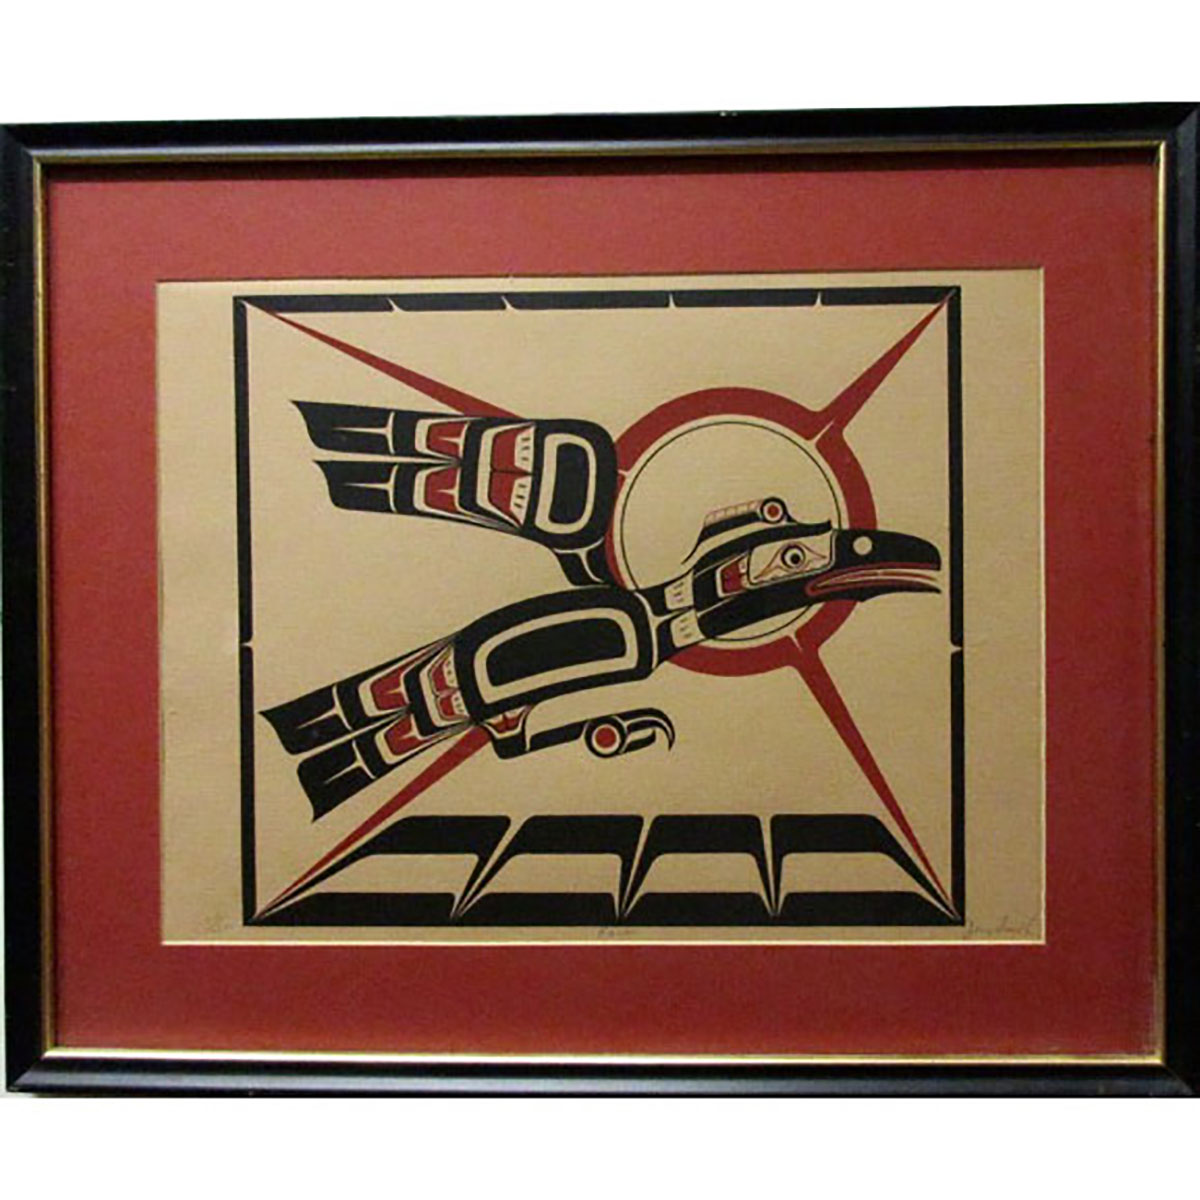 JERRY SMITH (NATIVE CANADIAN, 1941-) CLARENCE A. WELLS (NATIVE CANADIAN, 1950-)